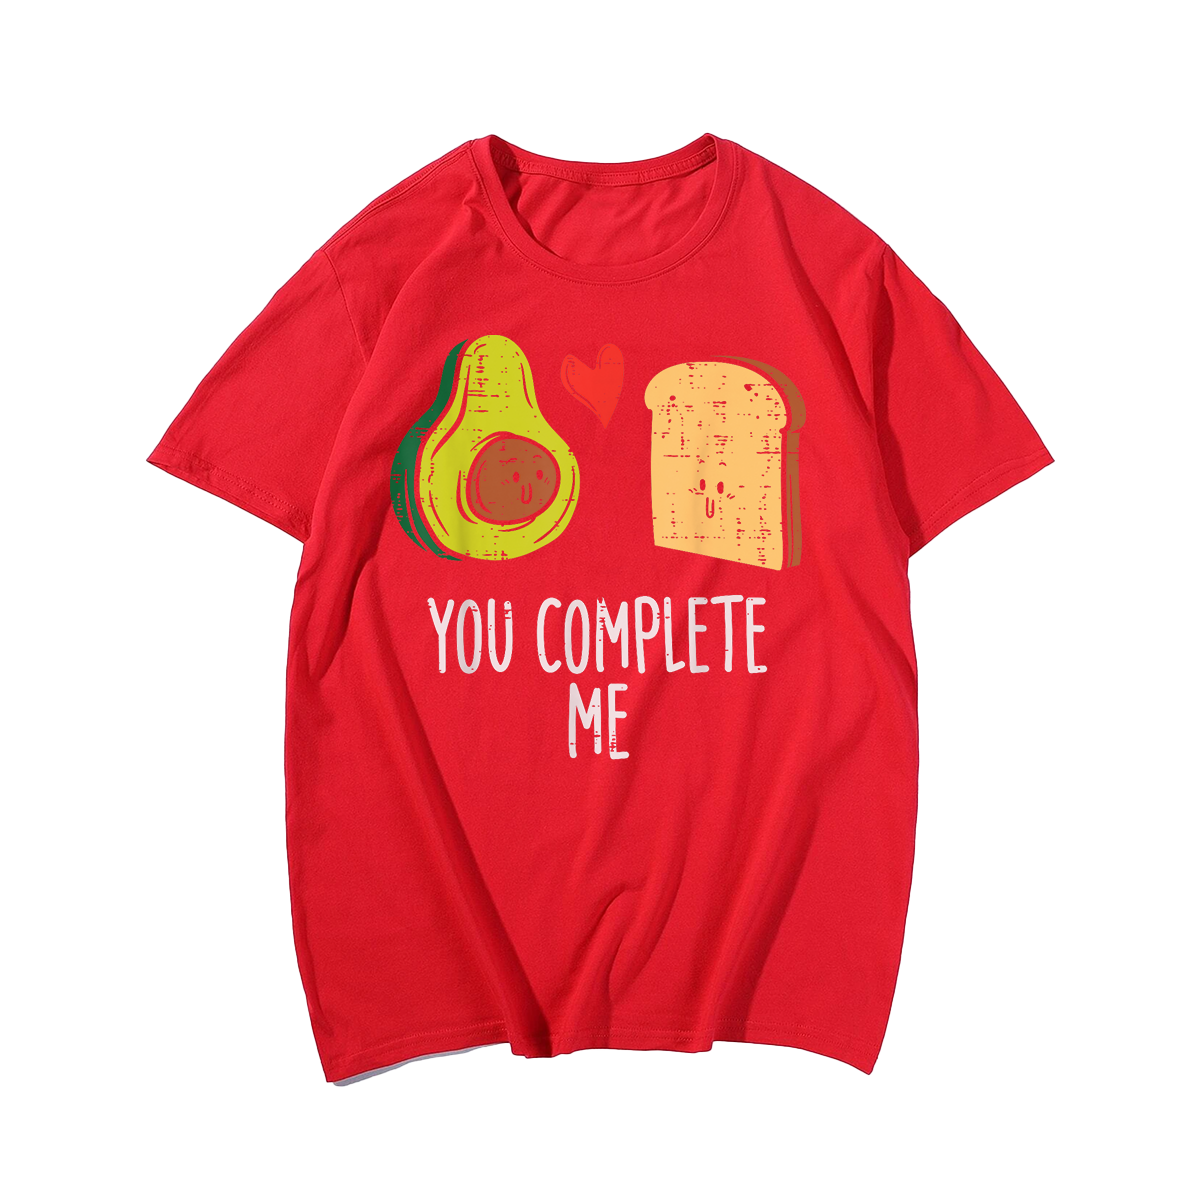 Avocado Toast You Complete Me Valentines Day T-Shirt, Men Plus Size Oversize T-shirt for Big & Tall Man